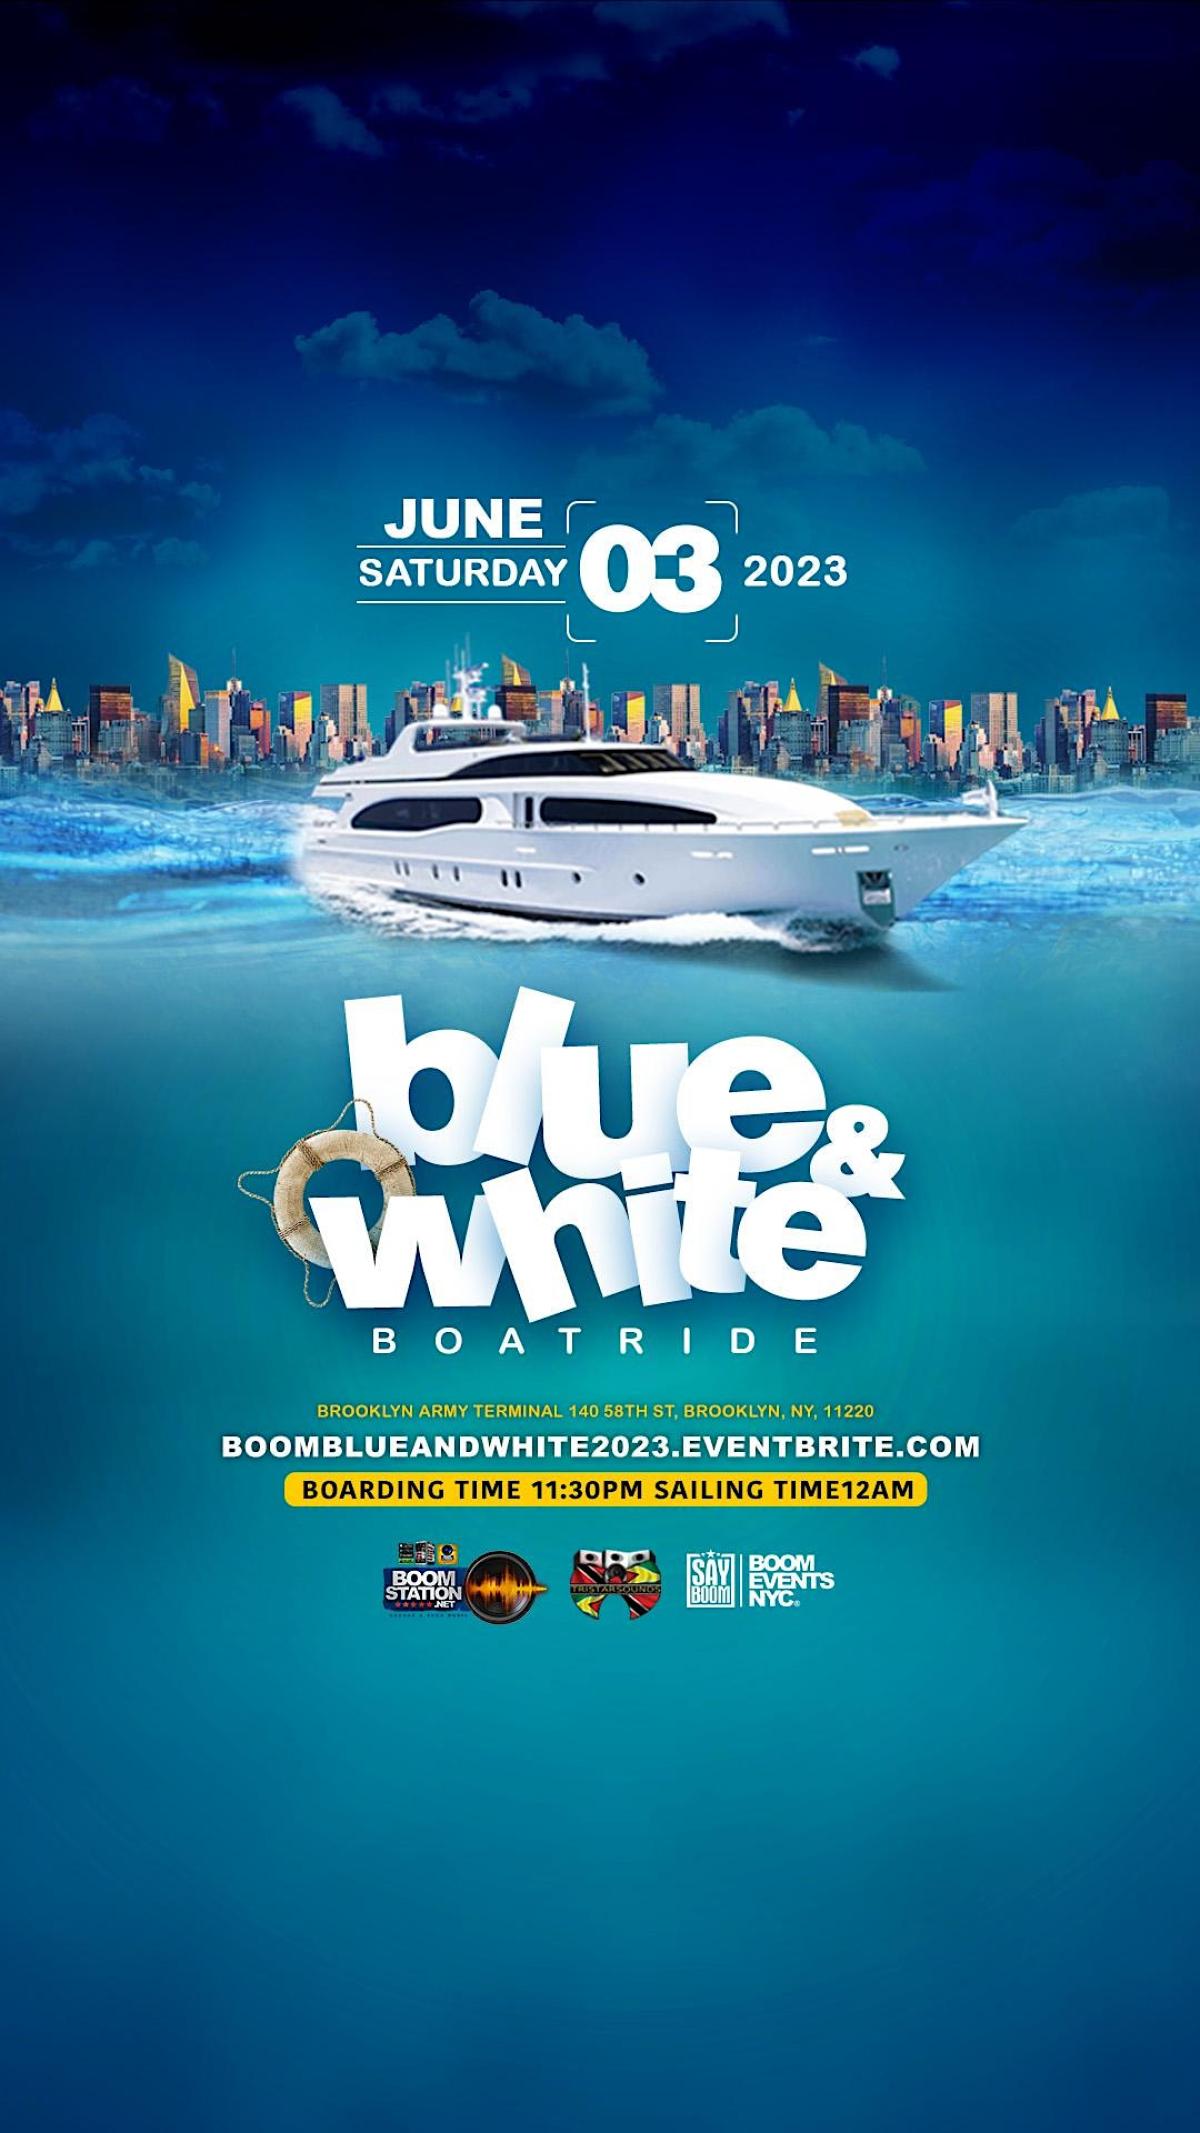 Blue & White Boat Ride flyer or graphic.